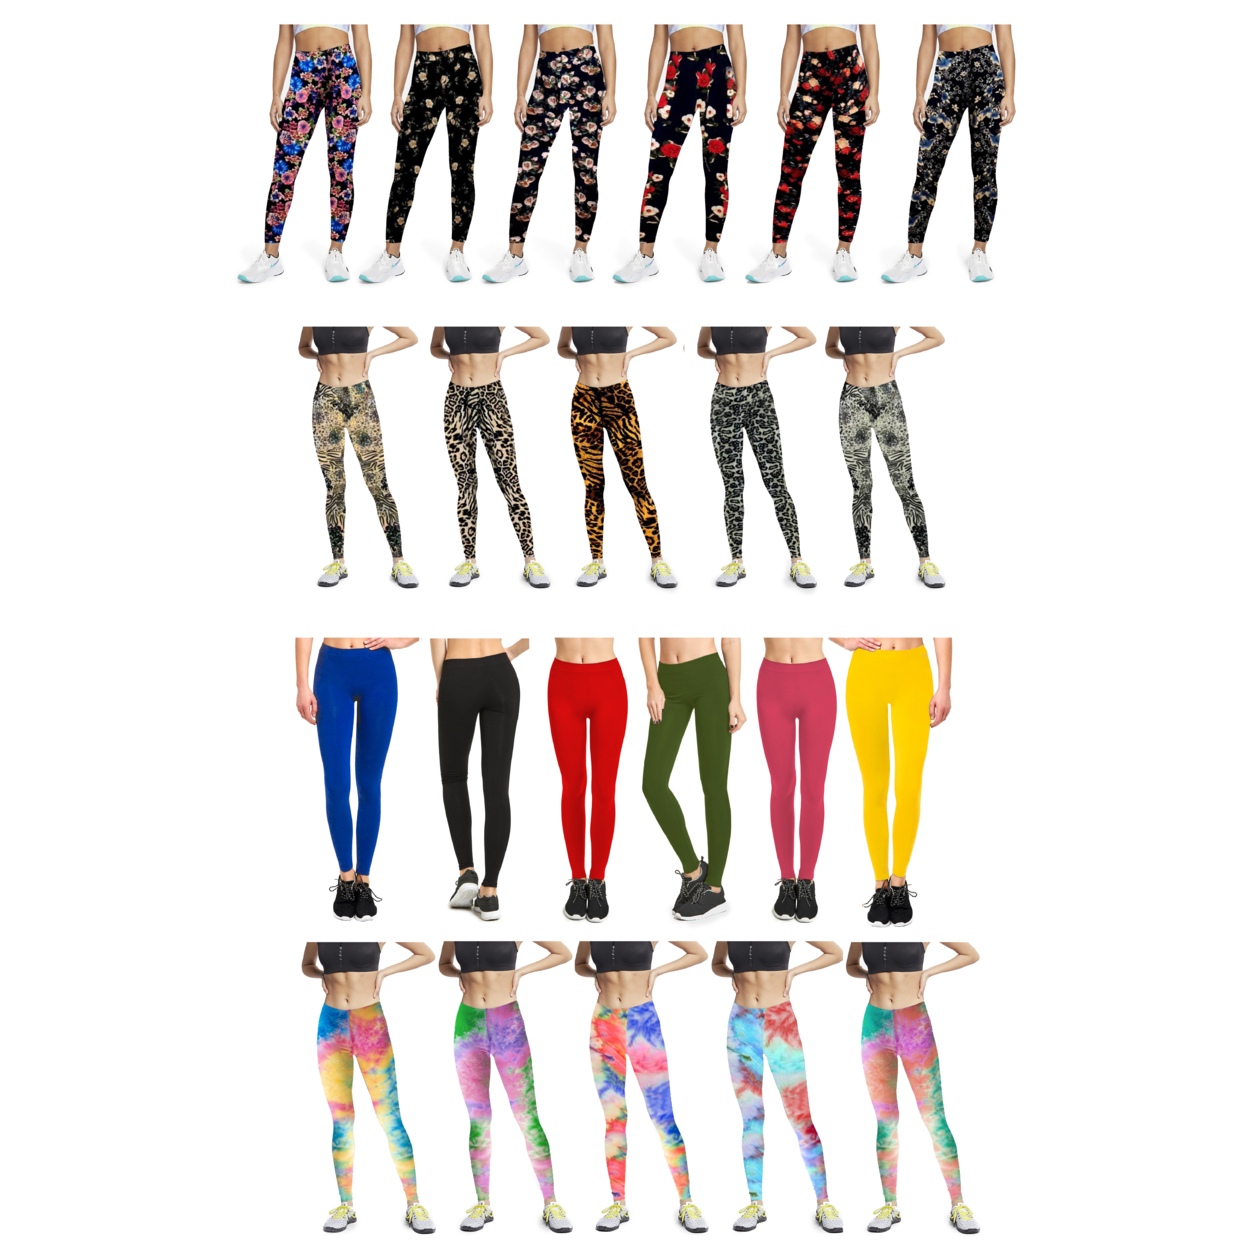 4-Pack: Women's Slim Fit Comfy Stretchy Elastic Waistband Leggings - Small, Animal